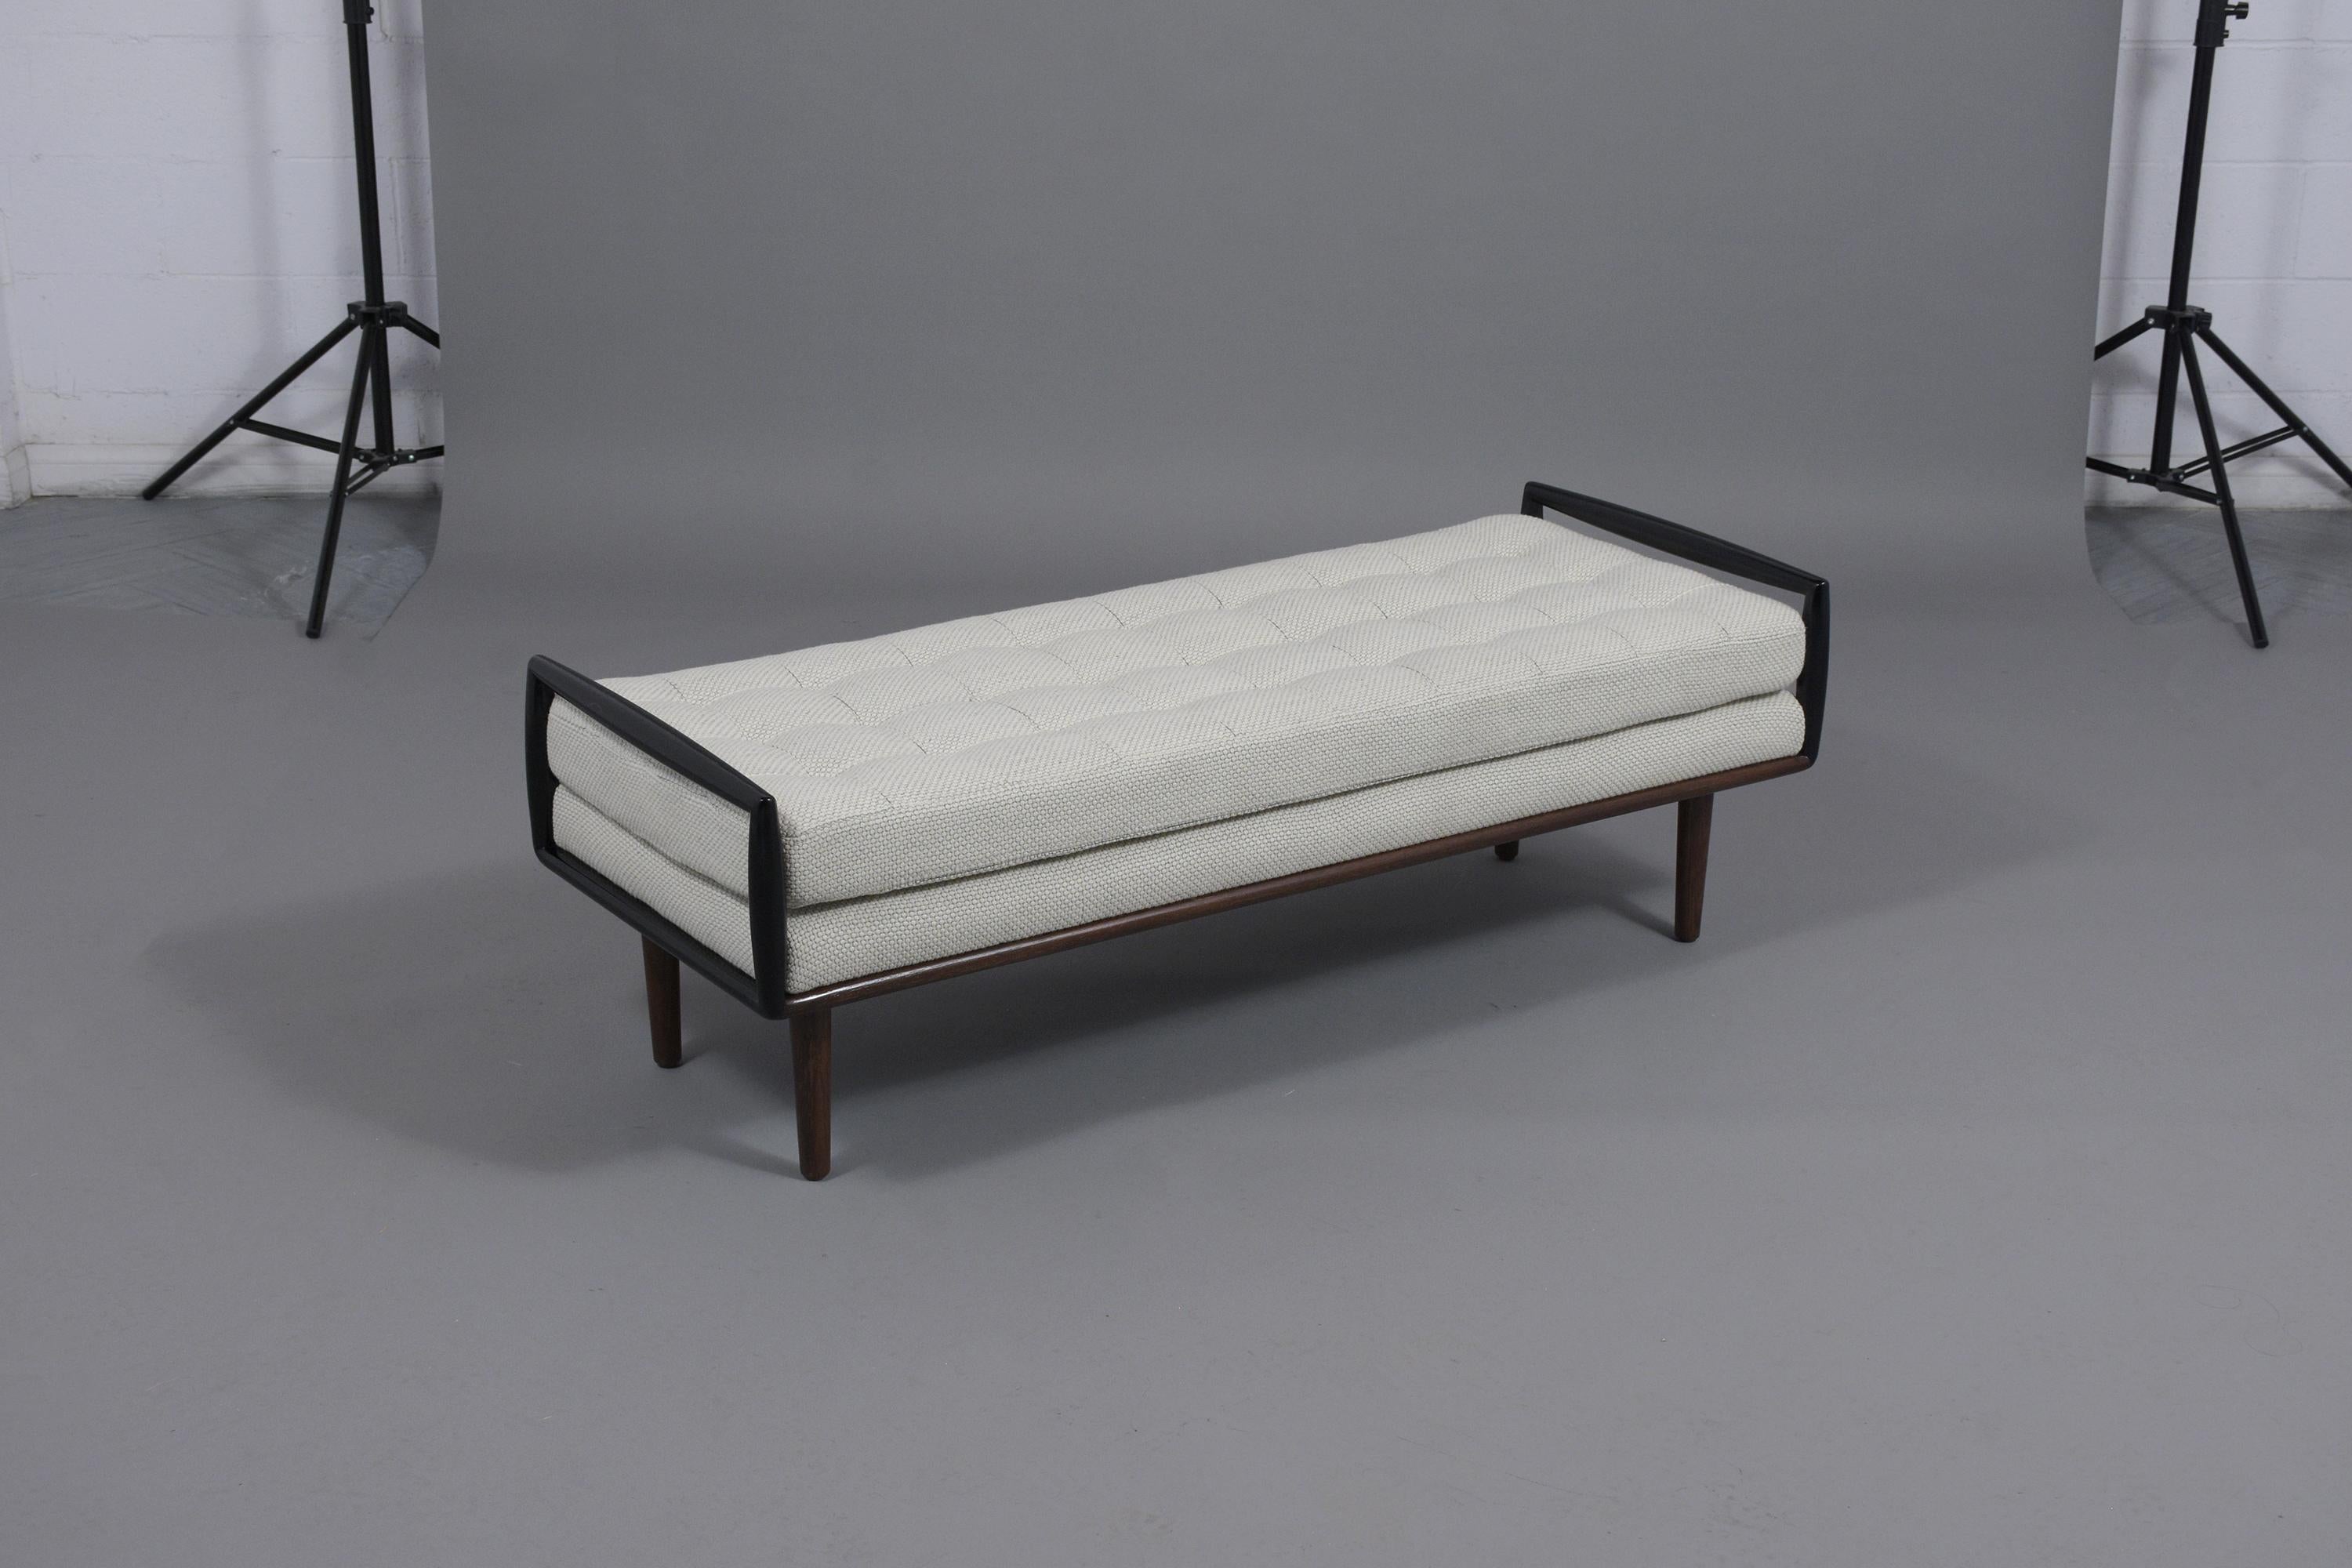 A slick Danish modern bench is hand-crafted out of rosewood and has been fully restored. The two-seater bench features a carved framed raise by four carved tapered legs newly finished in dark mahogany and ebonized color combination with a lacquer